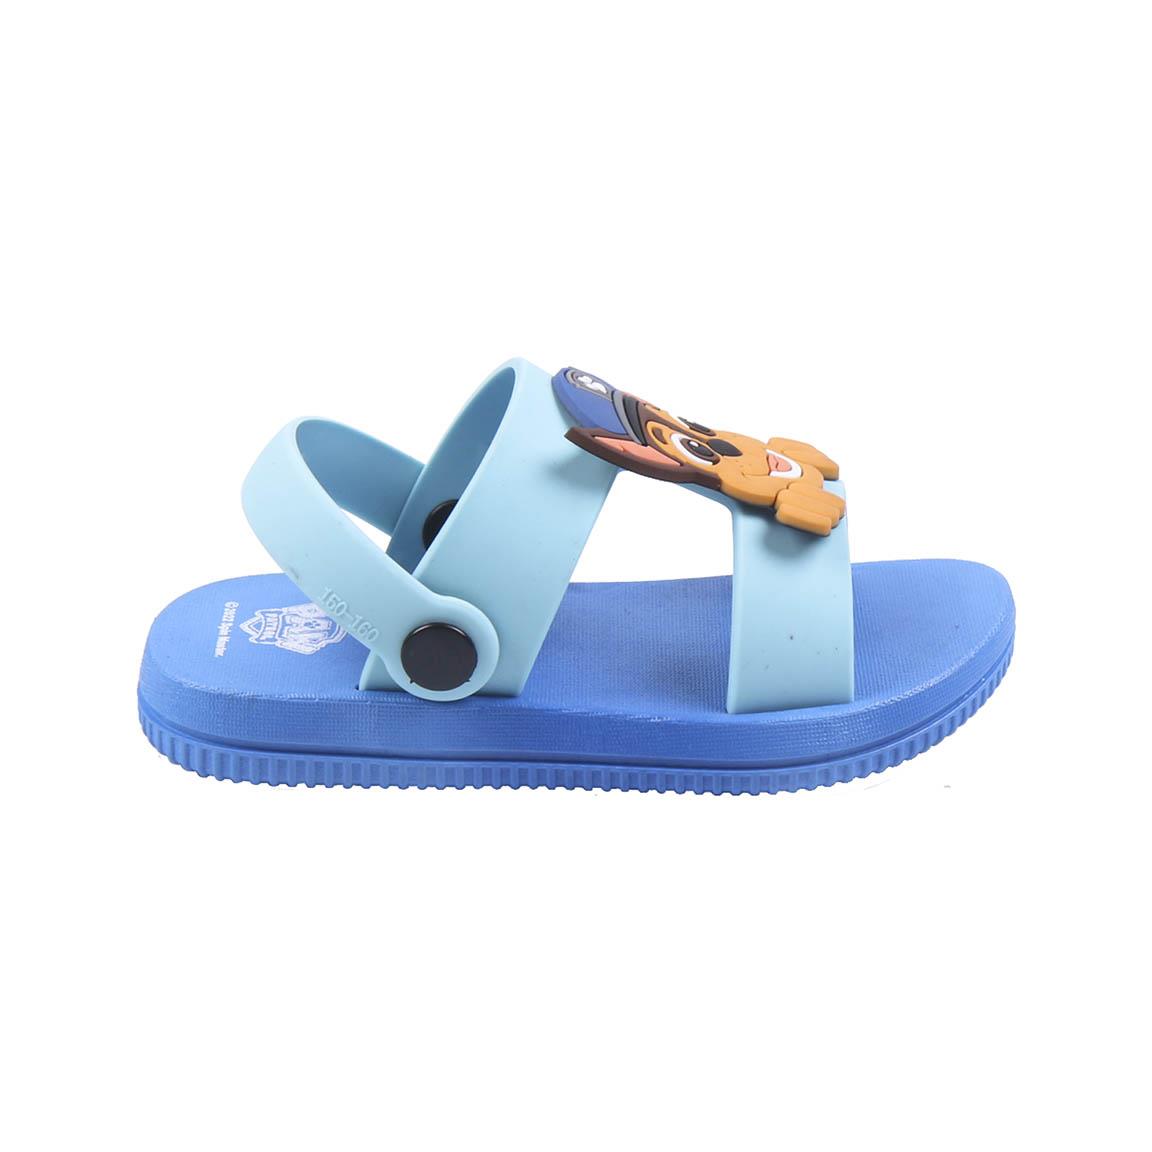 SANDALS CASUAL RUBBER PAW PATROL